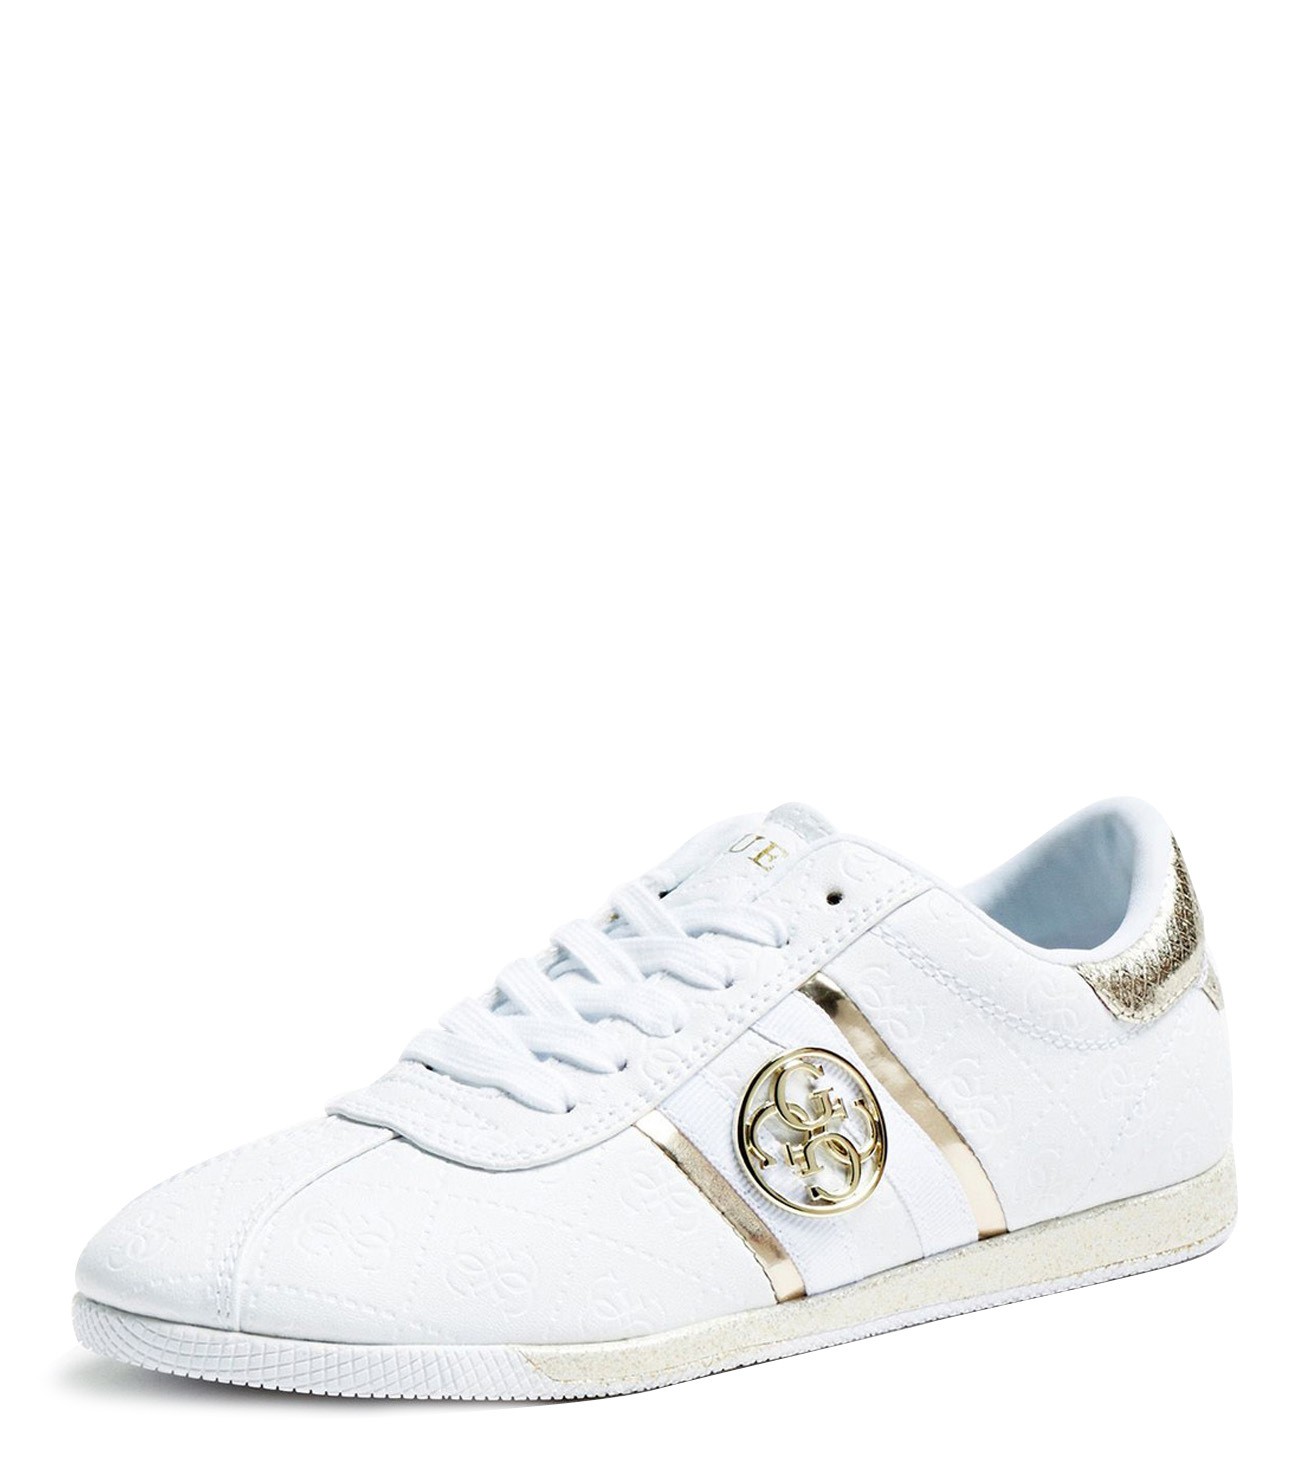 guess white sneakers